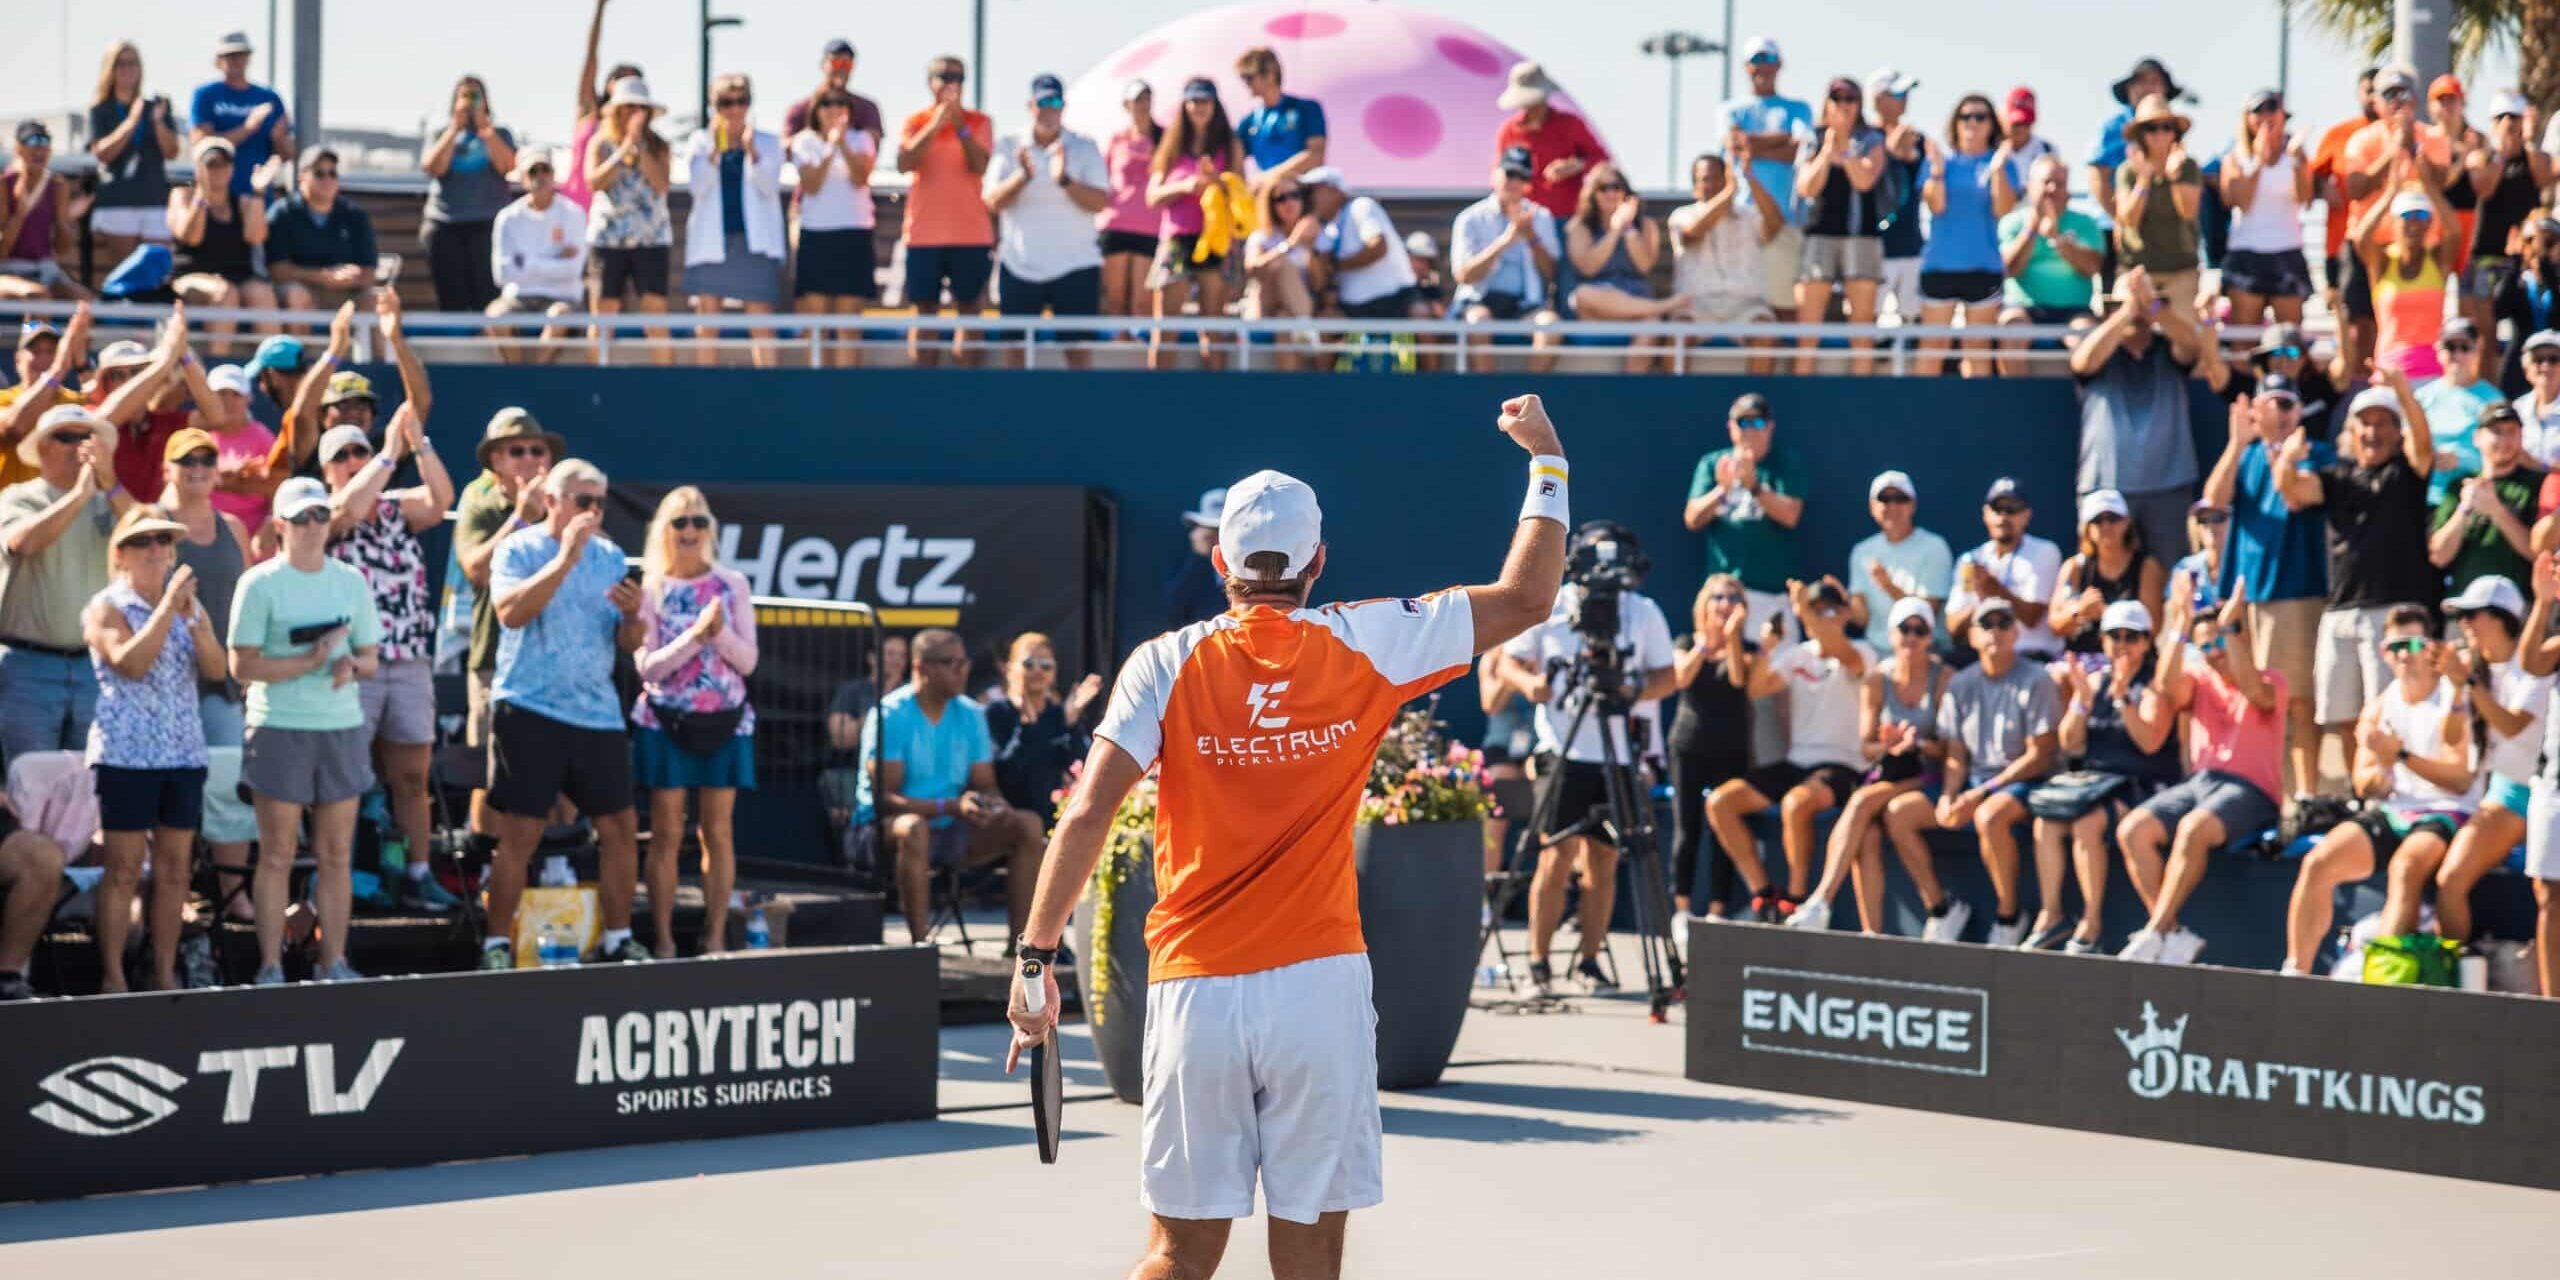 pickleball is america's favorite sports fitness activity in 2023